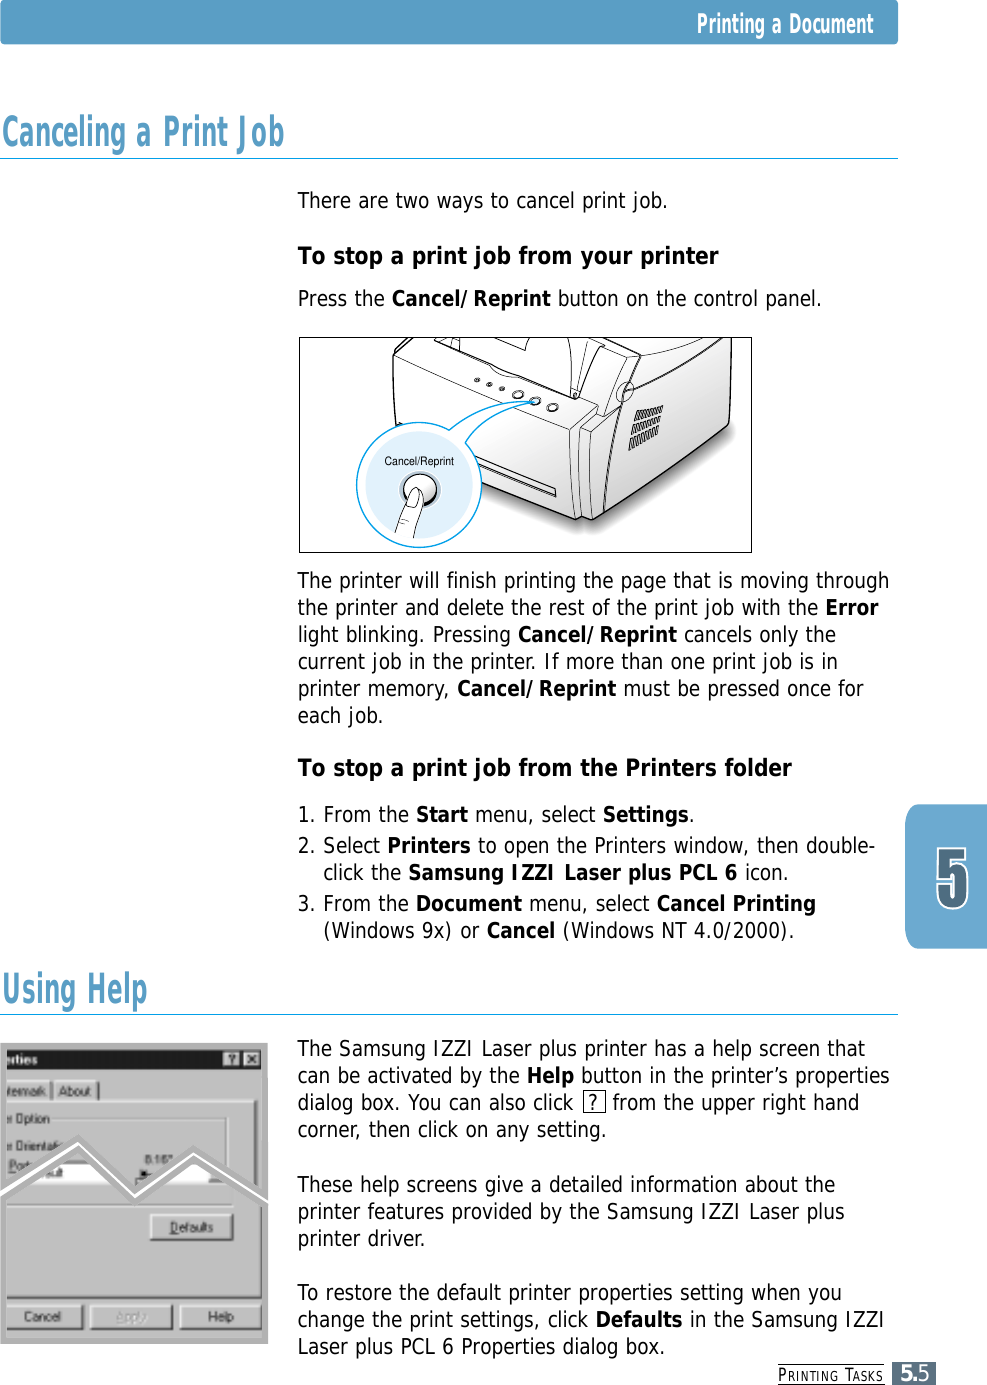 PRINTING TASKS5.5Printing a DocumentThere are two ways to cancel print job.To stop a print job from your printerPress the Cancel/Reprint button on the control panel. The printer will finish printing the page that is moving throughthe printer and delete the rest of the print job with the Errorlight blinking. Pressing Cancel/Reprint cancels only thecurrent job in the printer. If more than one print job is inprinter memory, Cancel/Reprint must be pressed once foreach job.To stop a print job from the Printers folder1. From the Start menu, select Settings.2. Select Printers to open the Printers window, then double-click the Samsung IZZI Laser plus PCL 6 icon. 3. From the Document menu, select Cancel Printing(Windows 9x) or Cancel (Windows NT 4.0/2000).The Samsung IZZI Laser plus printer has a help screen thatcan be activated by the Help button in the printer’s propertiesdialog box. You can also click  ?  from the upper right handcorner, then click on any setting. These help screens give a detailed information about theprinter features provided by the Samsung IZZI Laser plusprinter driver.To restore the default printer properties setting when youchange the print settings, click Defaults in the Samsung IZZILaser plus PCL 6 Properties dialog box.Cancel/ReprintCanceling a Print JobUsing Help